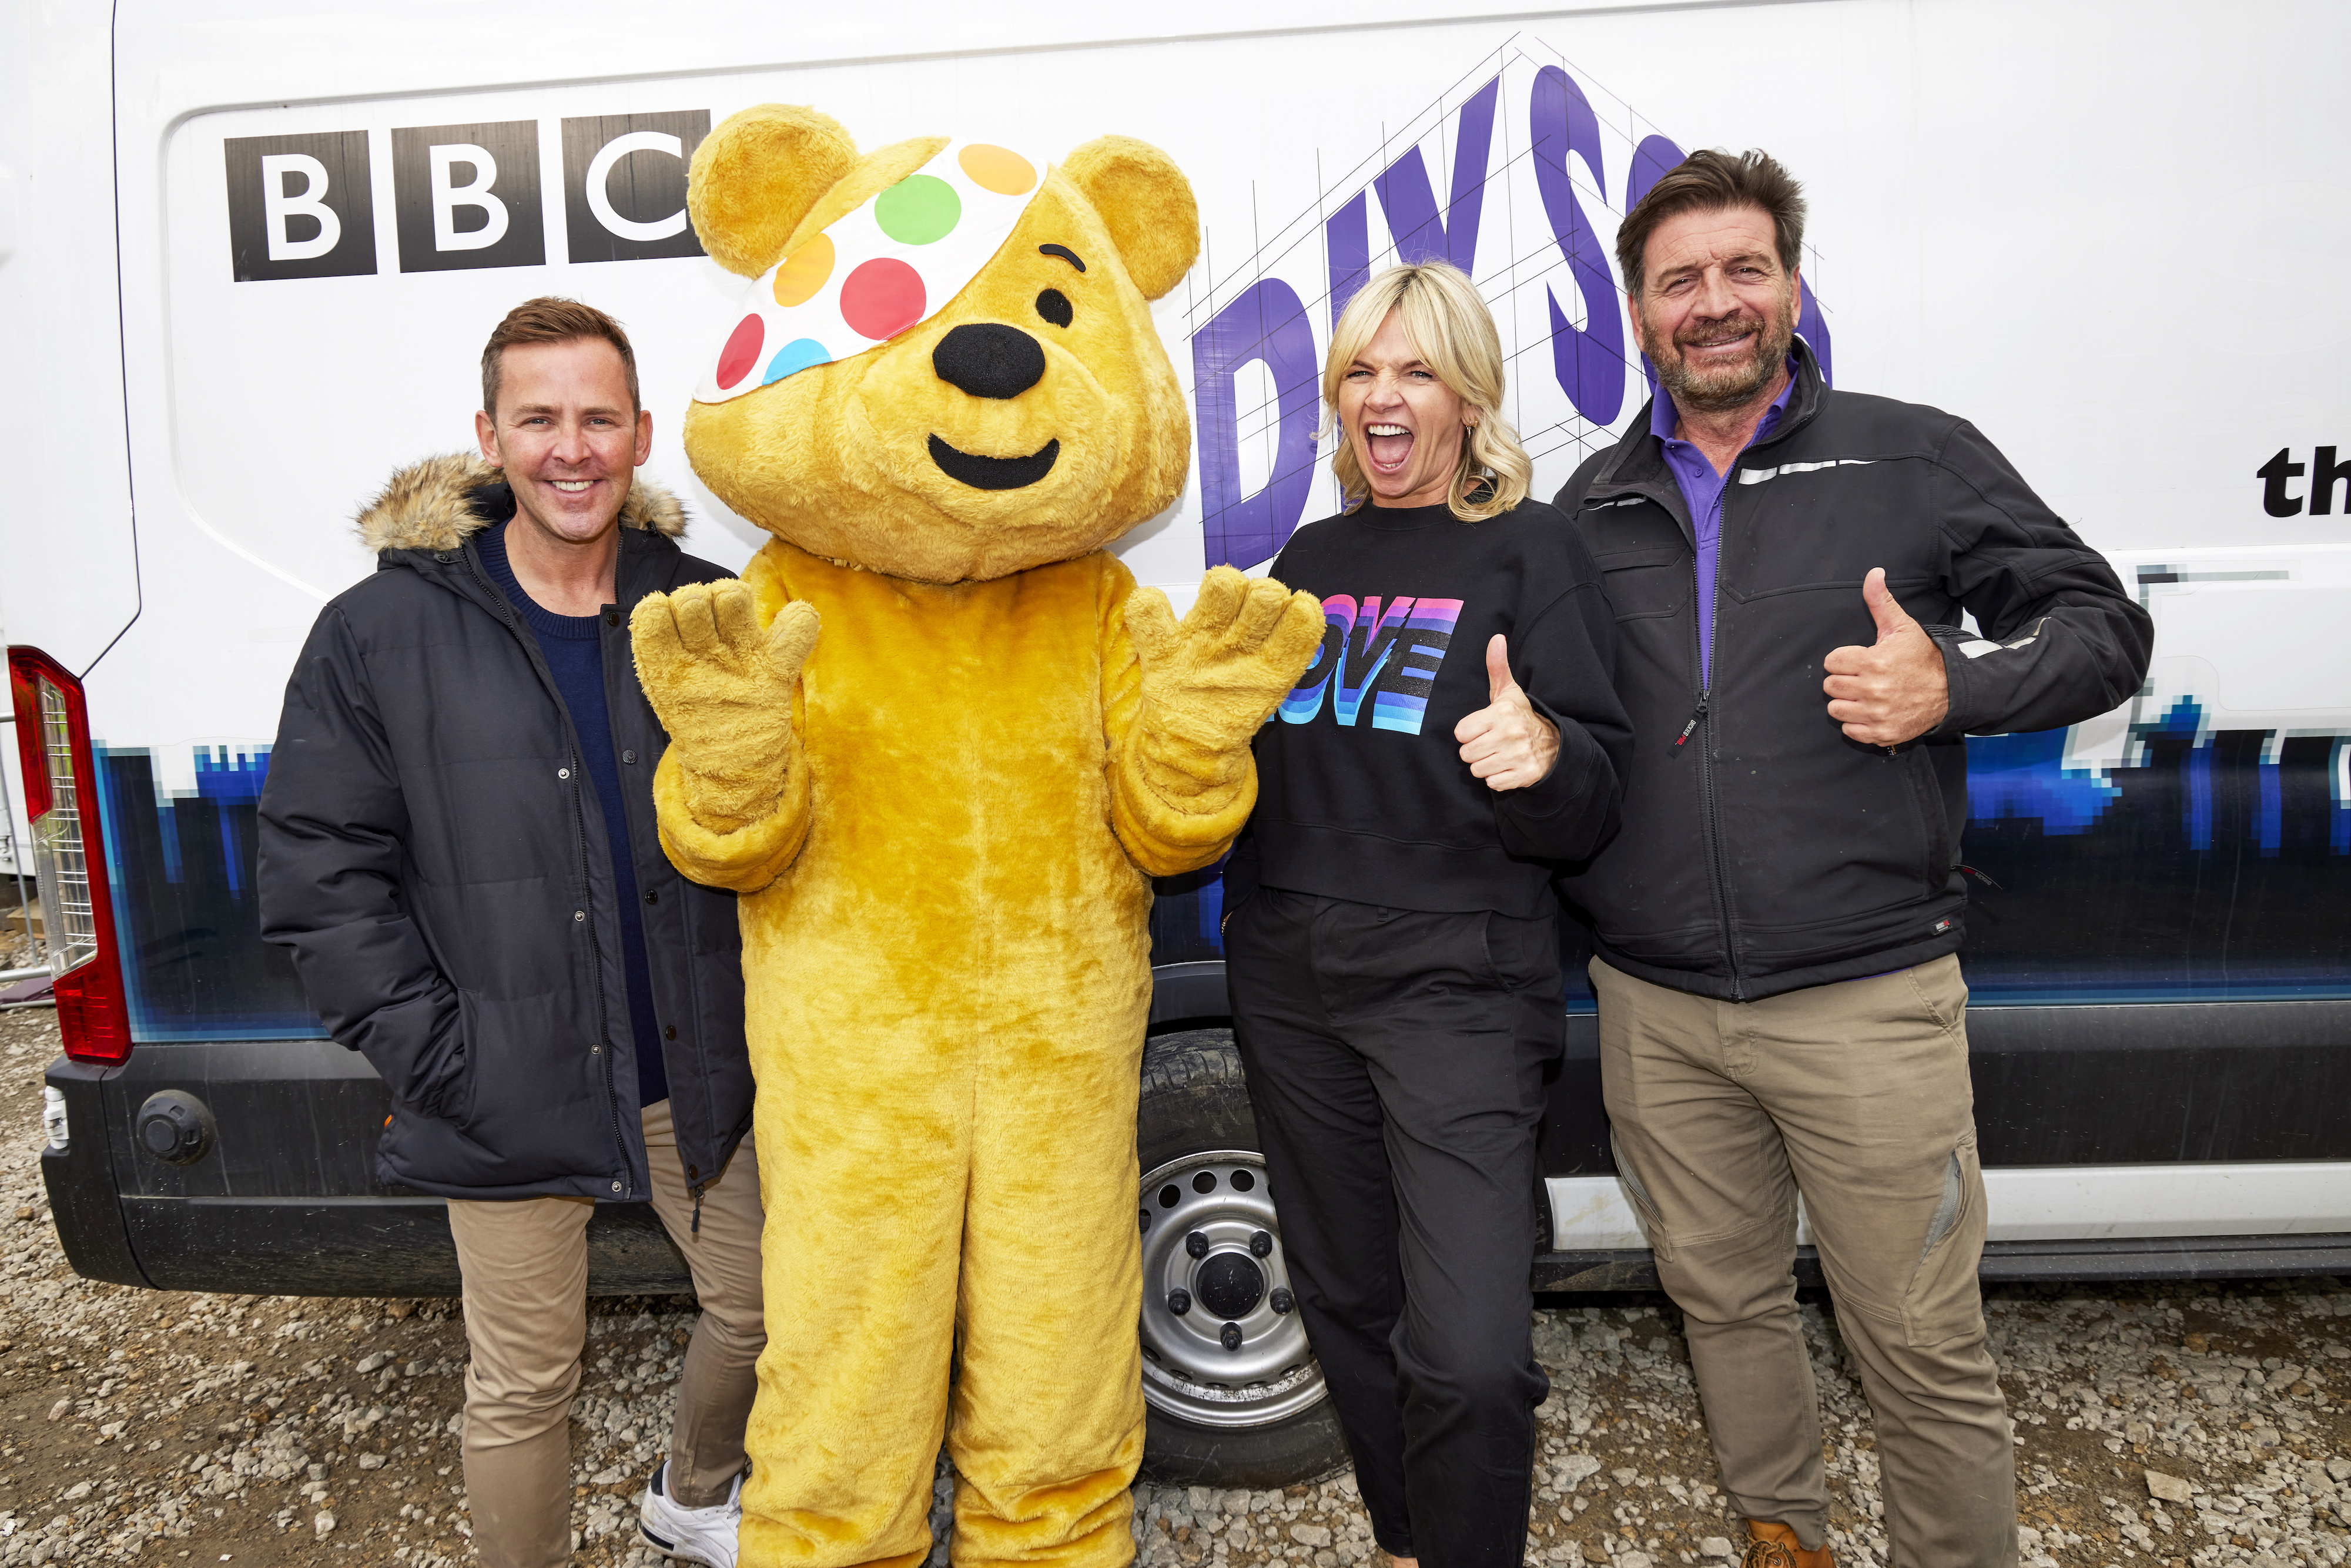 Scott Mills, Pudsey Bear, Zoe Ball and Nick Knowles give a thumbs up to the camera in front of a DIY SOS-branded van on the building site